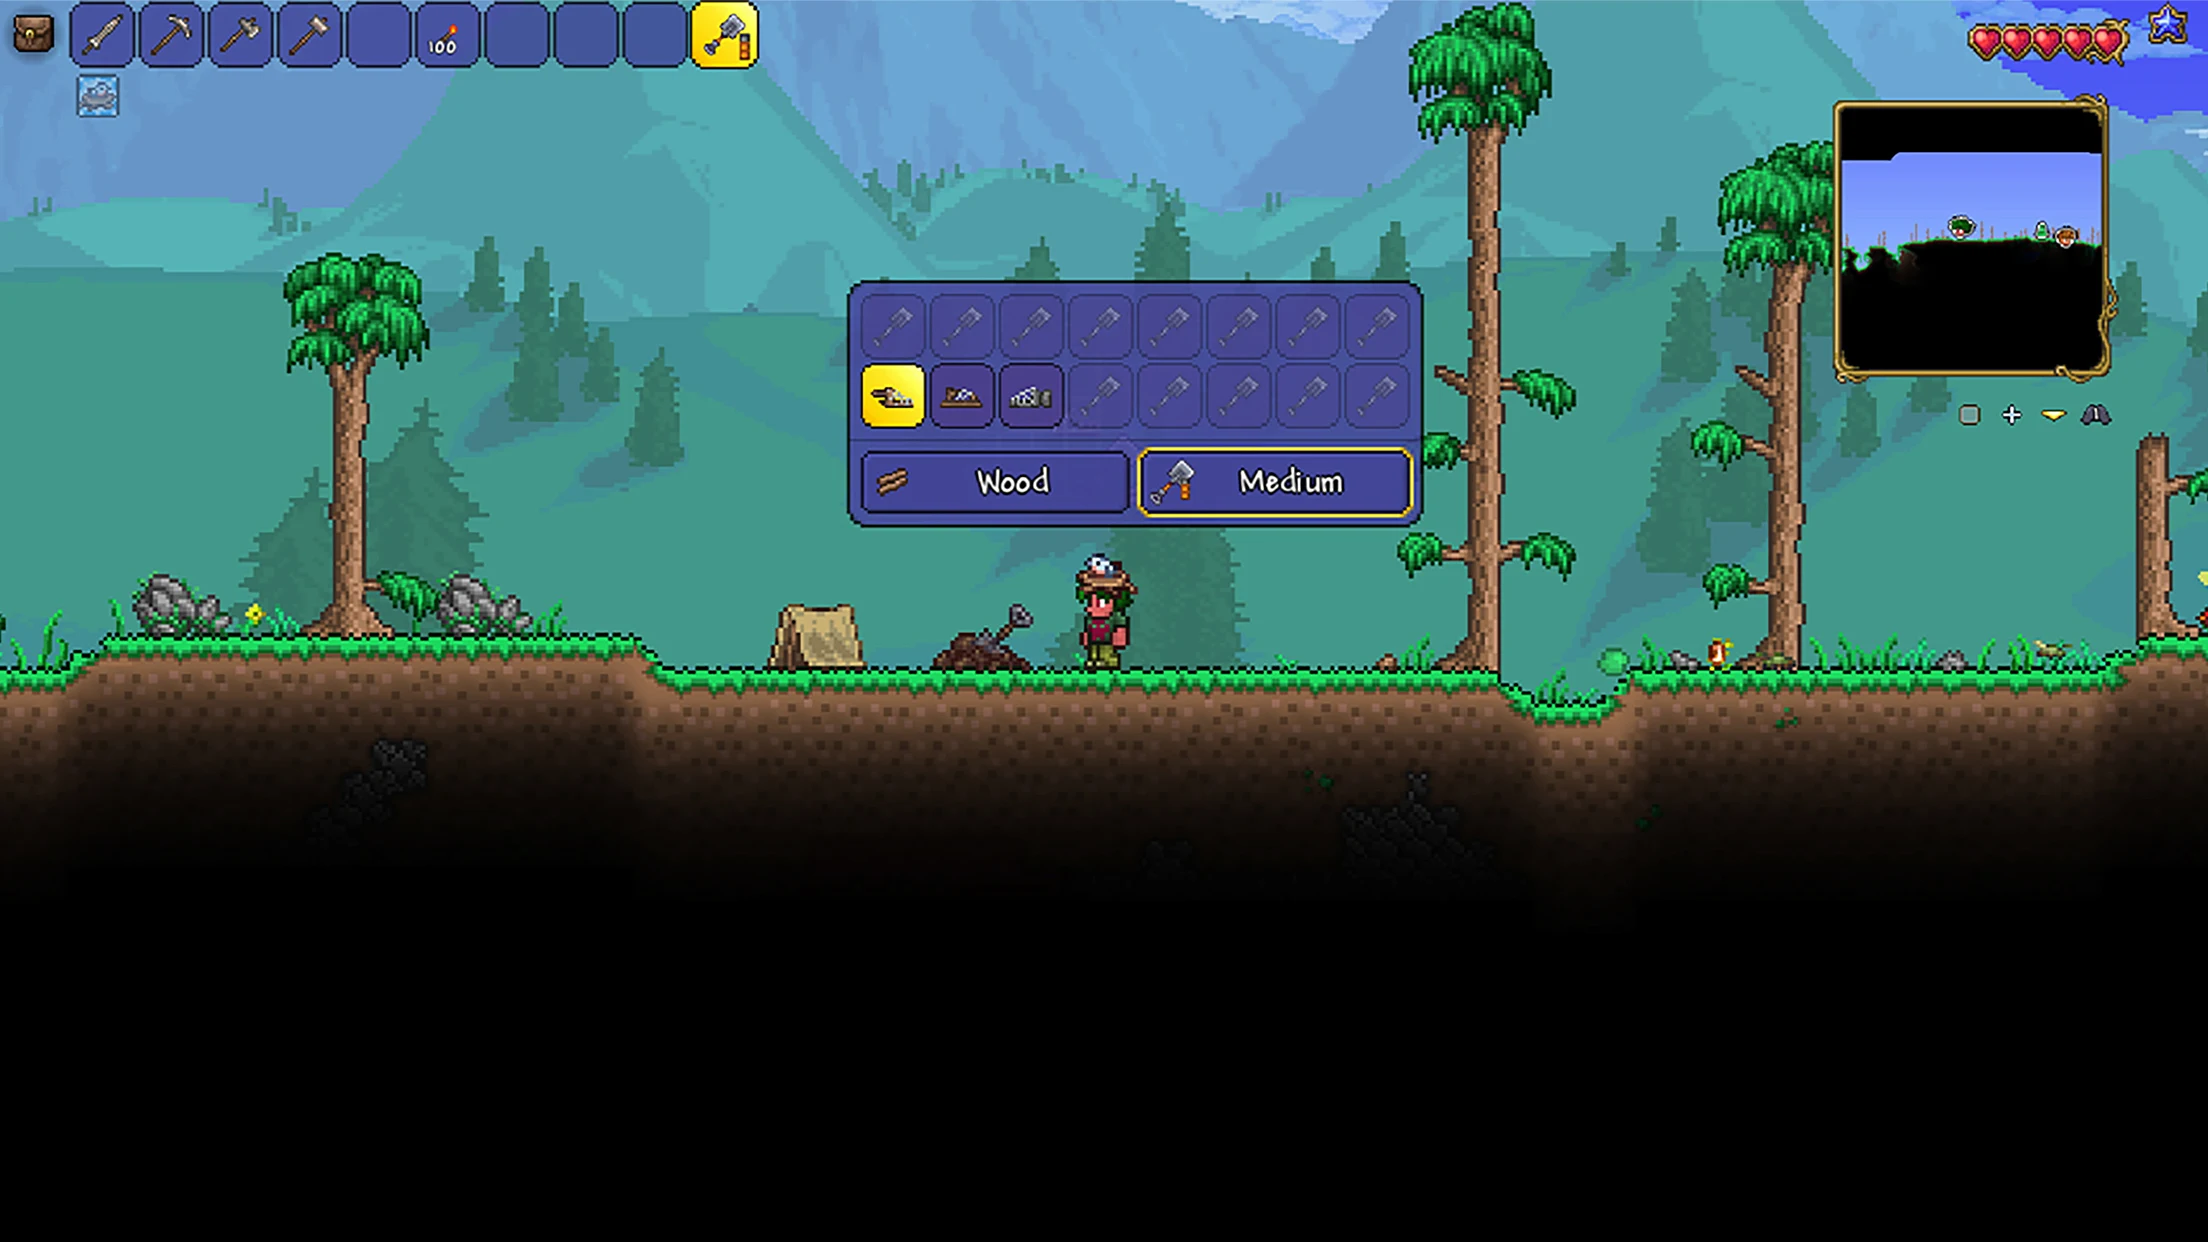 Terraria v1.4.4.5 (Unlimited Items/Immortality) (updated) Mod apk